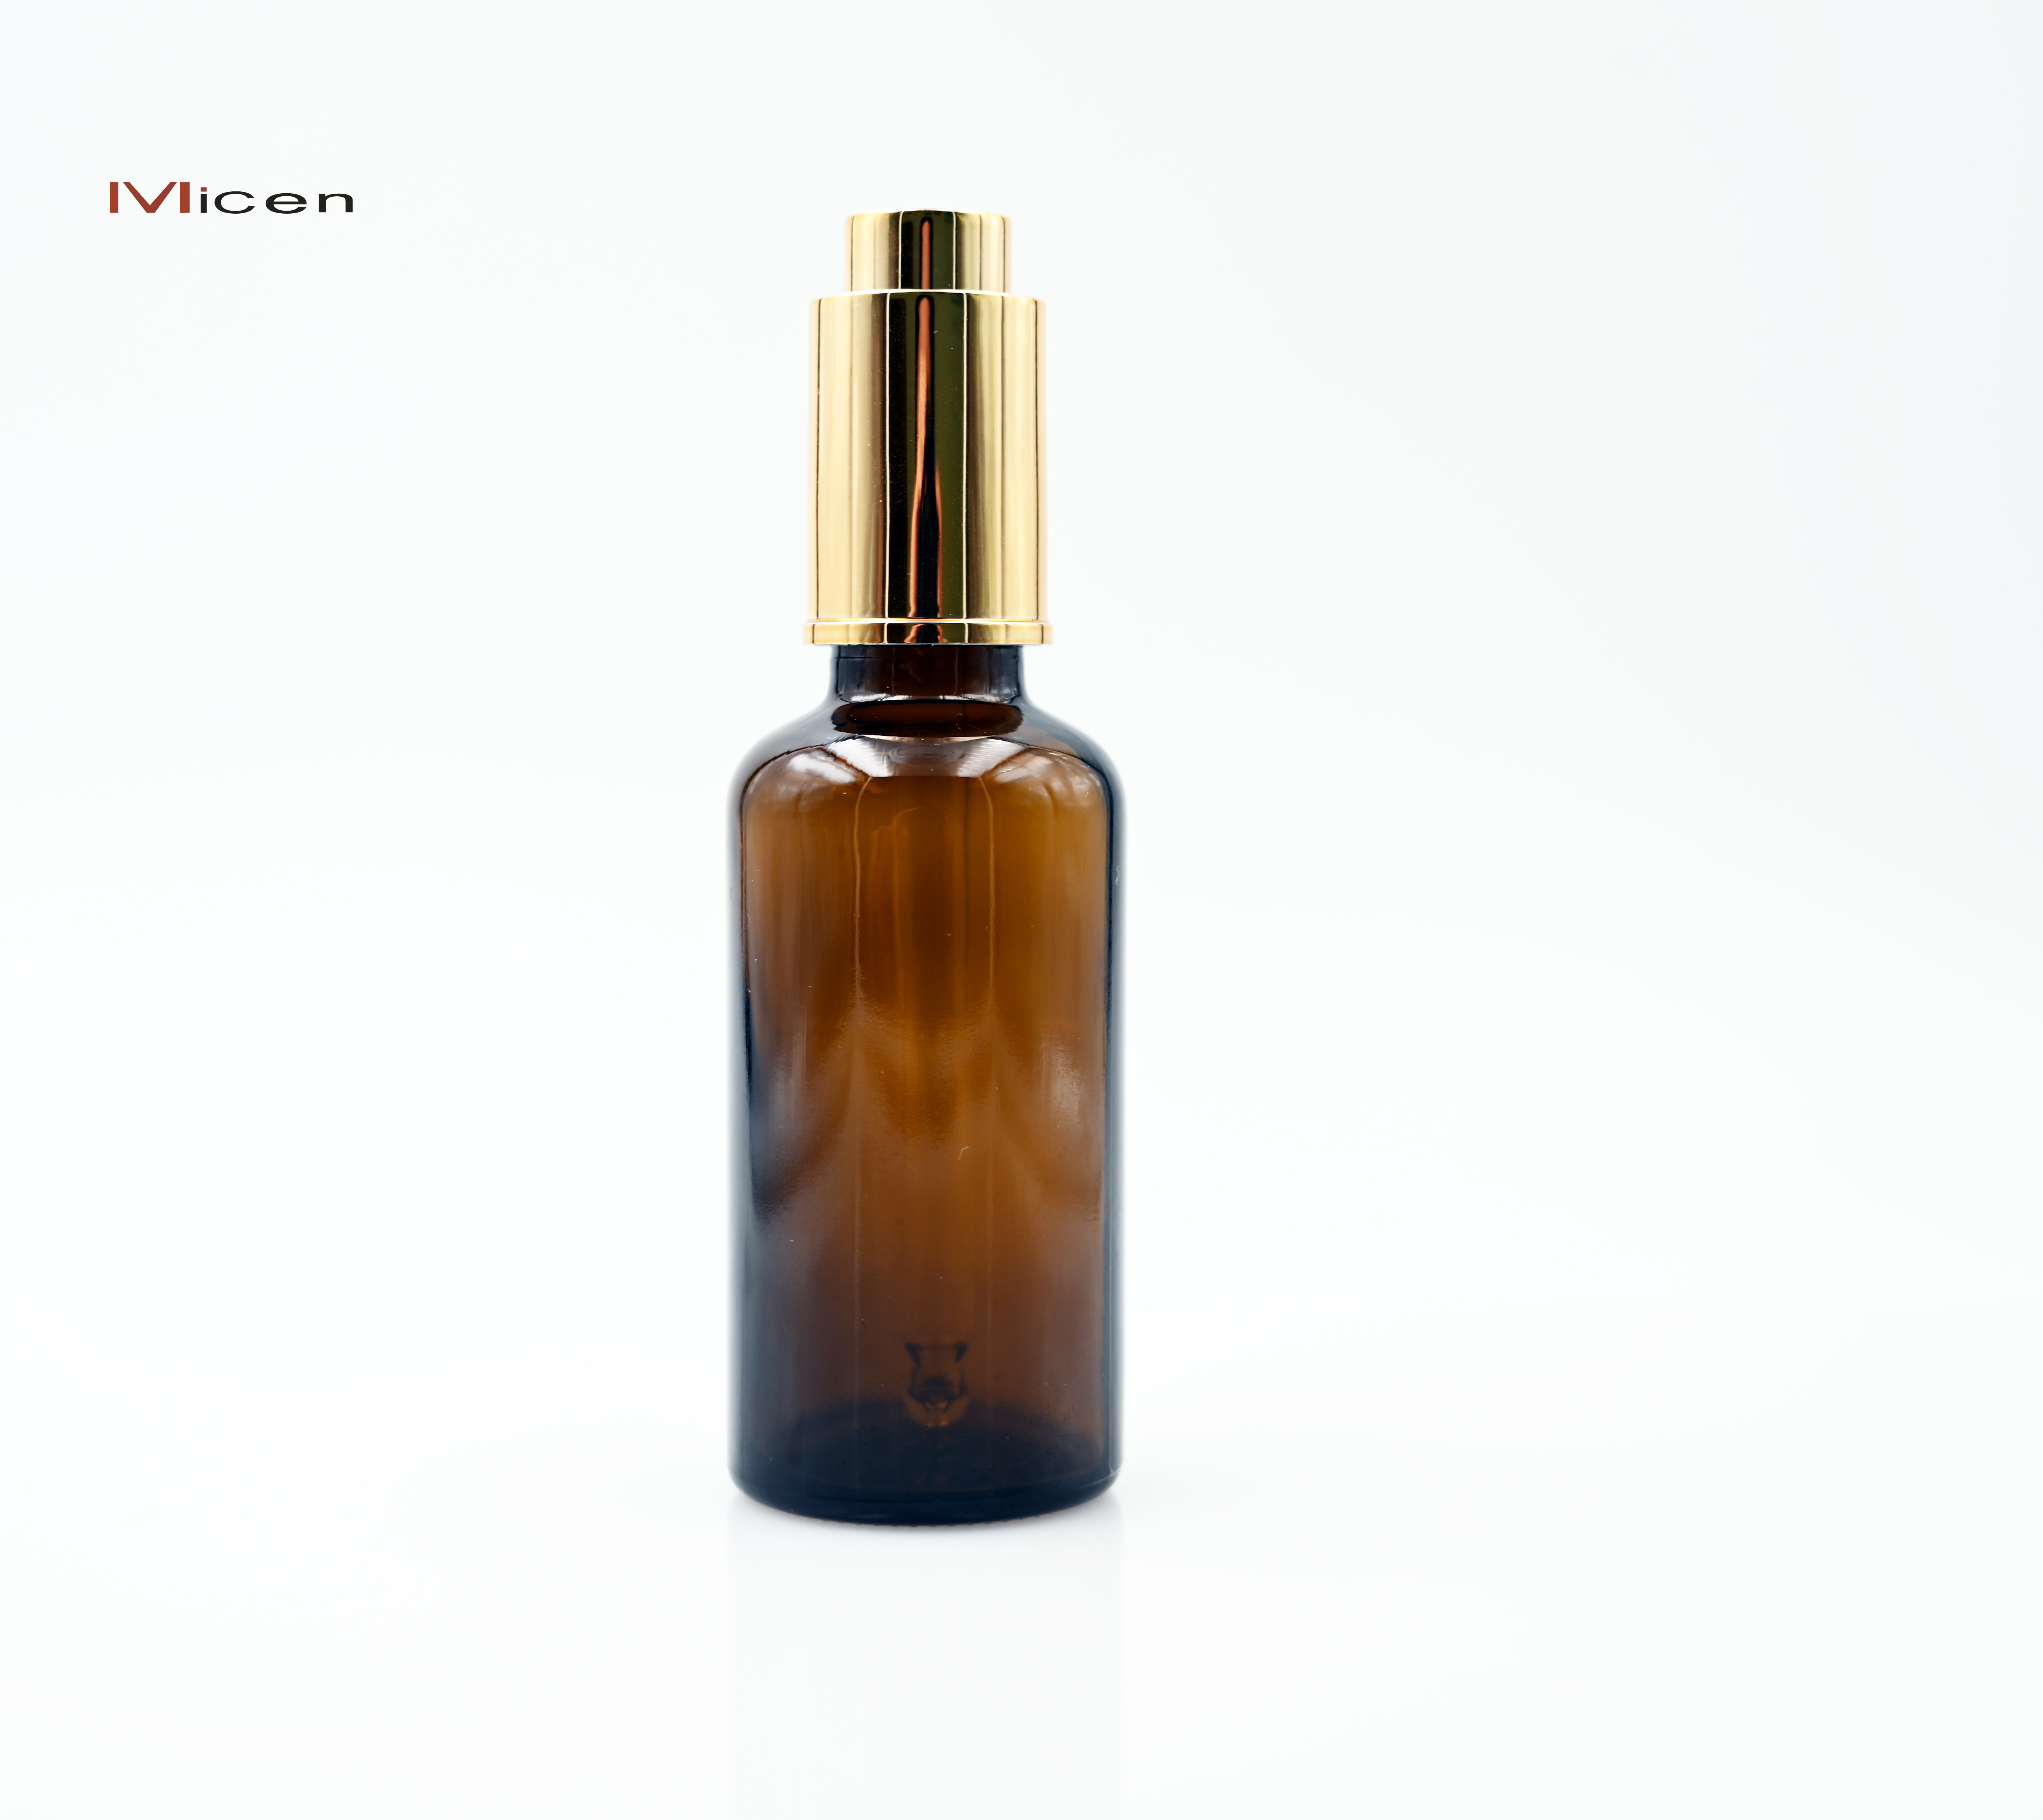 20-100ml amber glass bottle with Push button dropper Featured Image